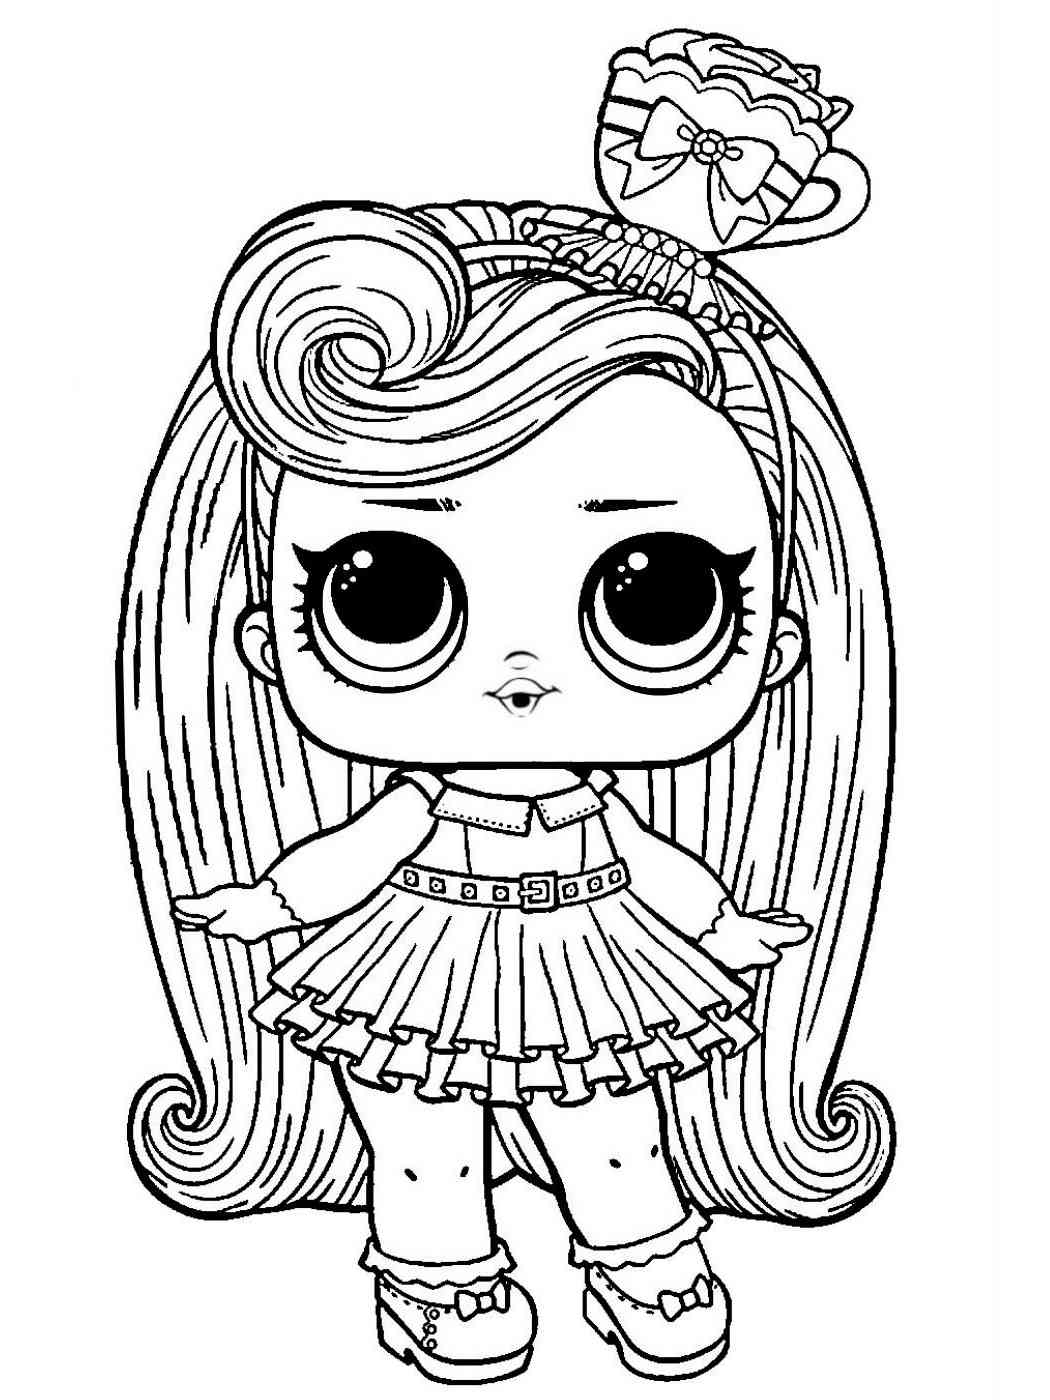 Lol dolls coloring pages